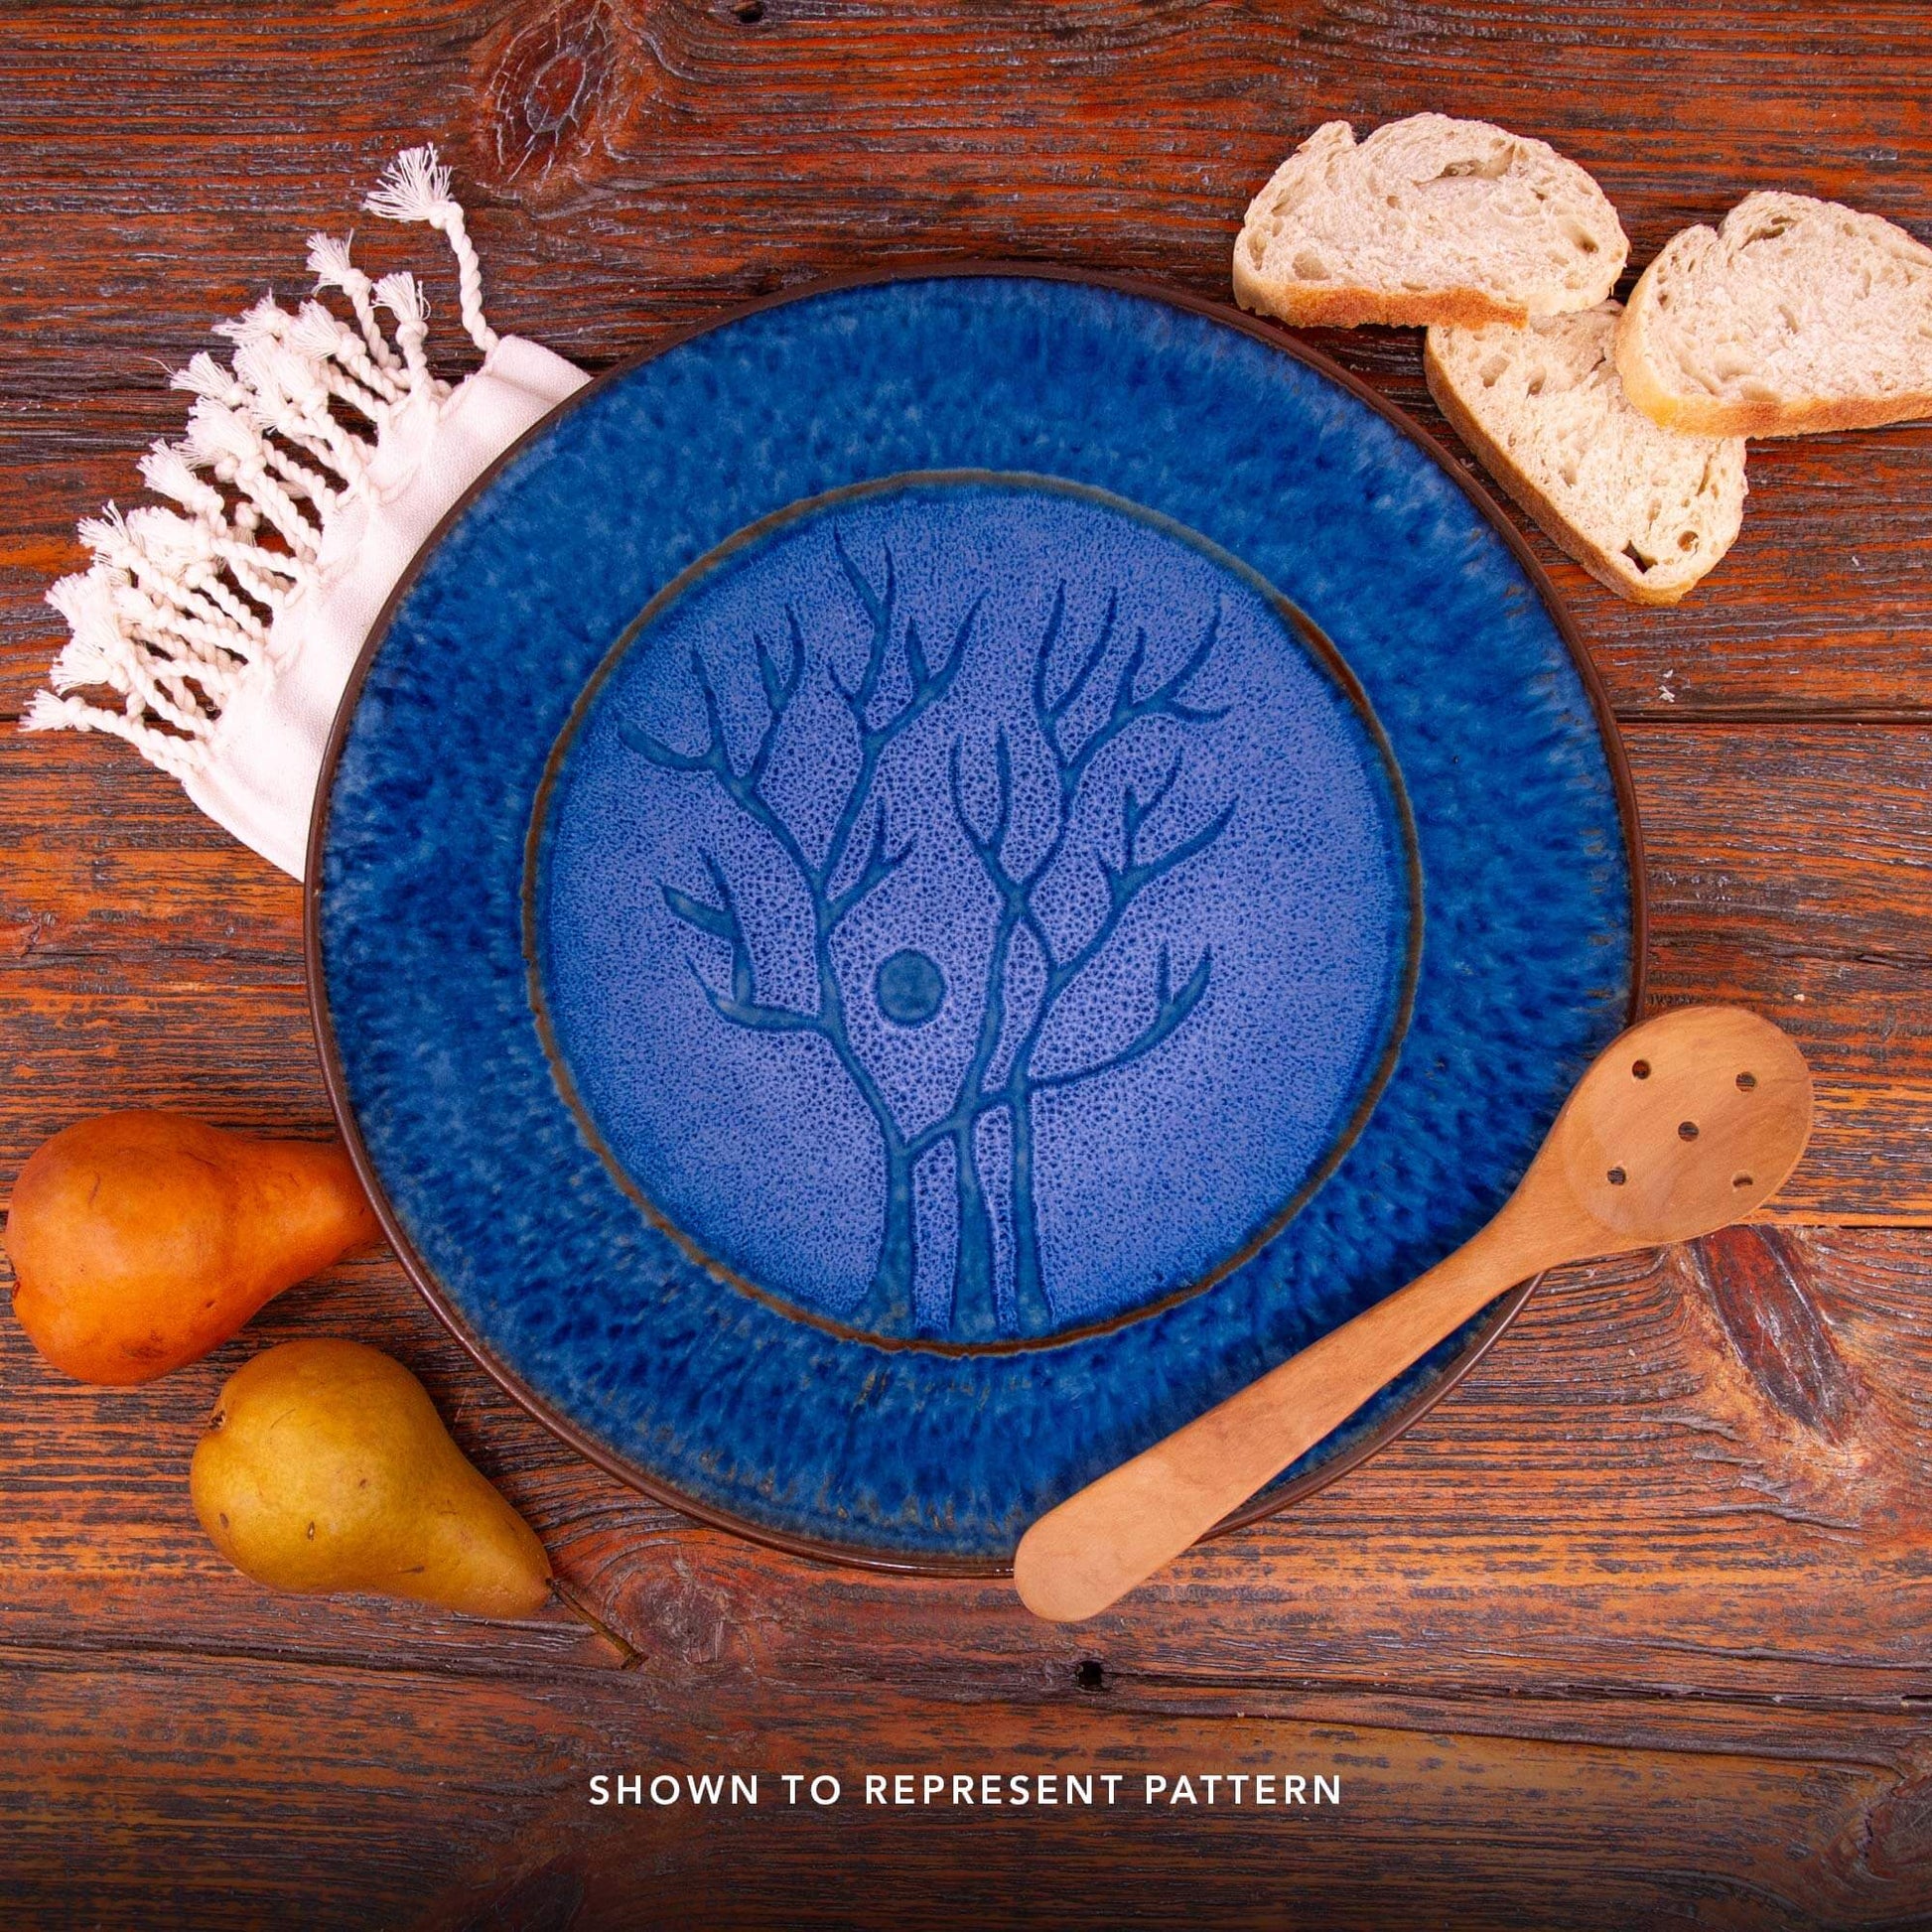 Handmade Pottery Pie Plate in Blue Tree pattern made by Georgetown Pottery in Maine